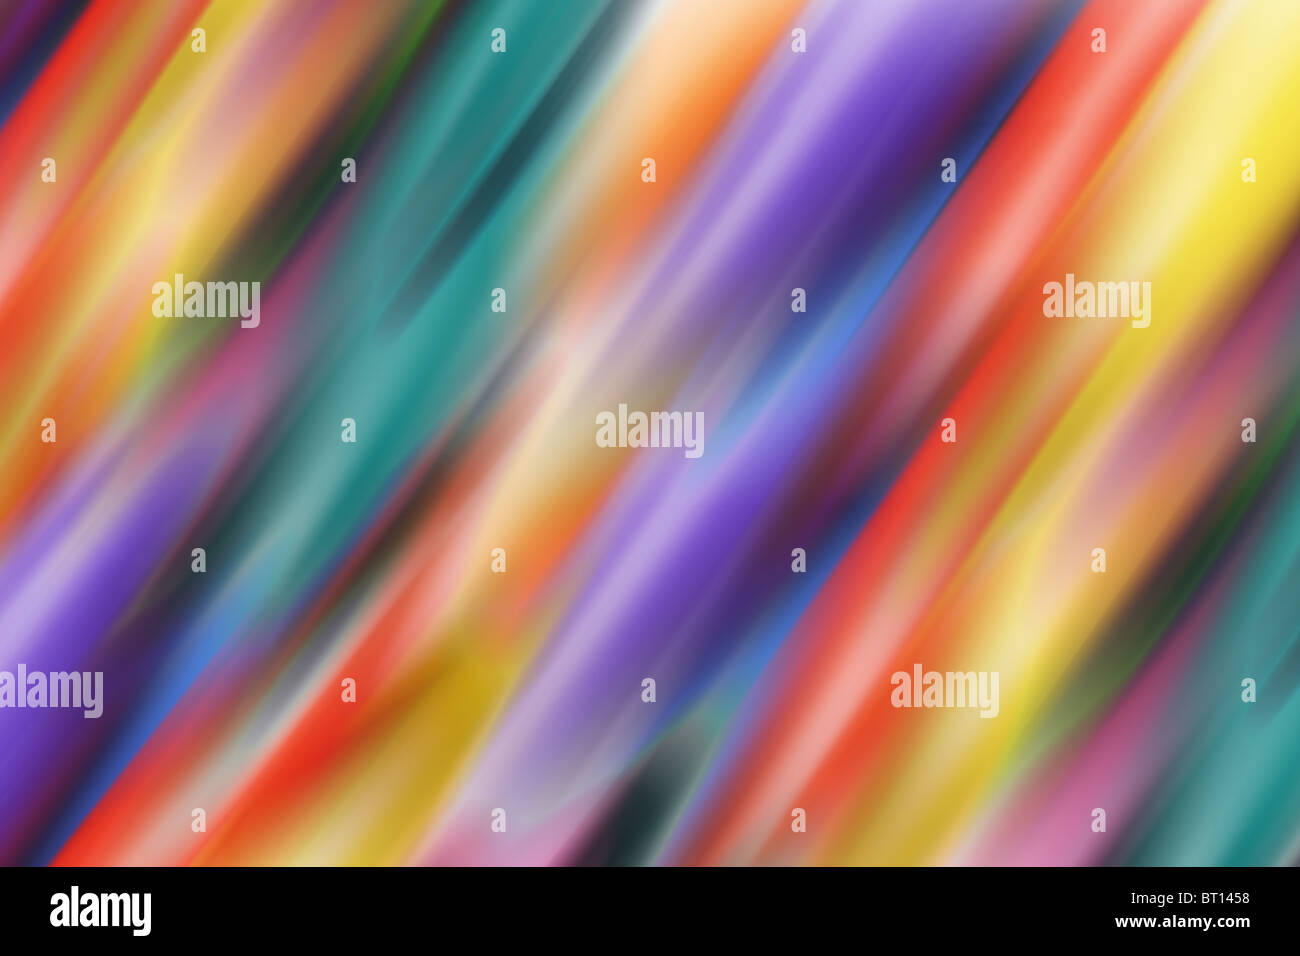 Abstract diagonal and overlapping multicolor background Stock Photo